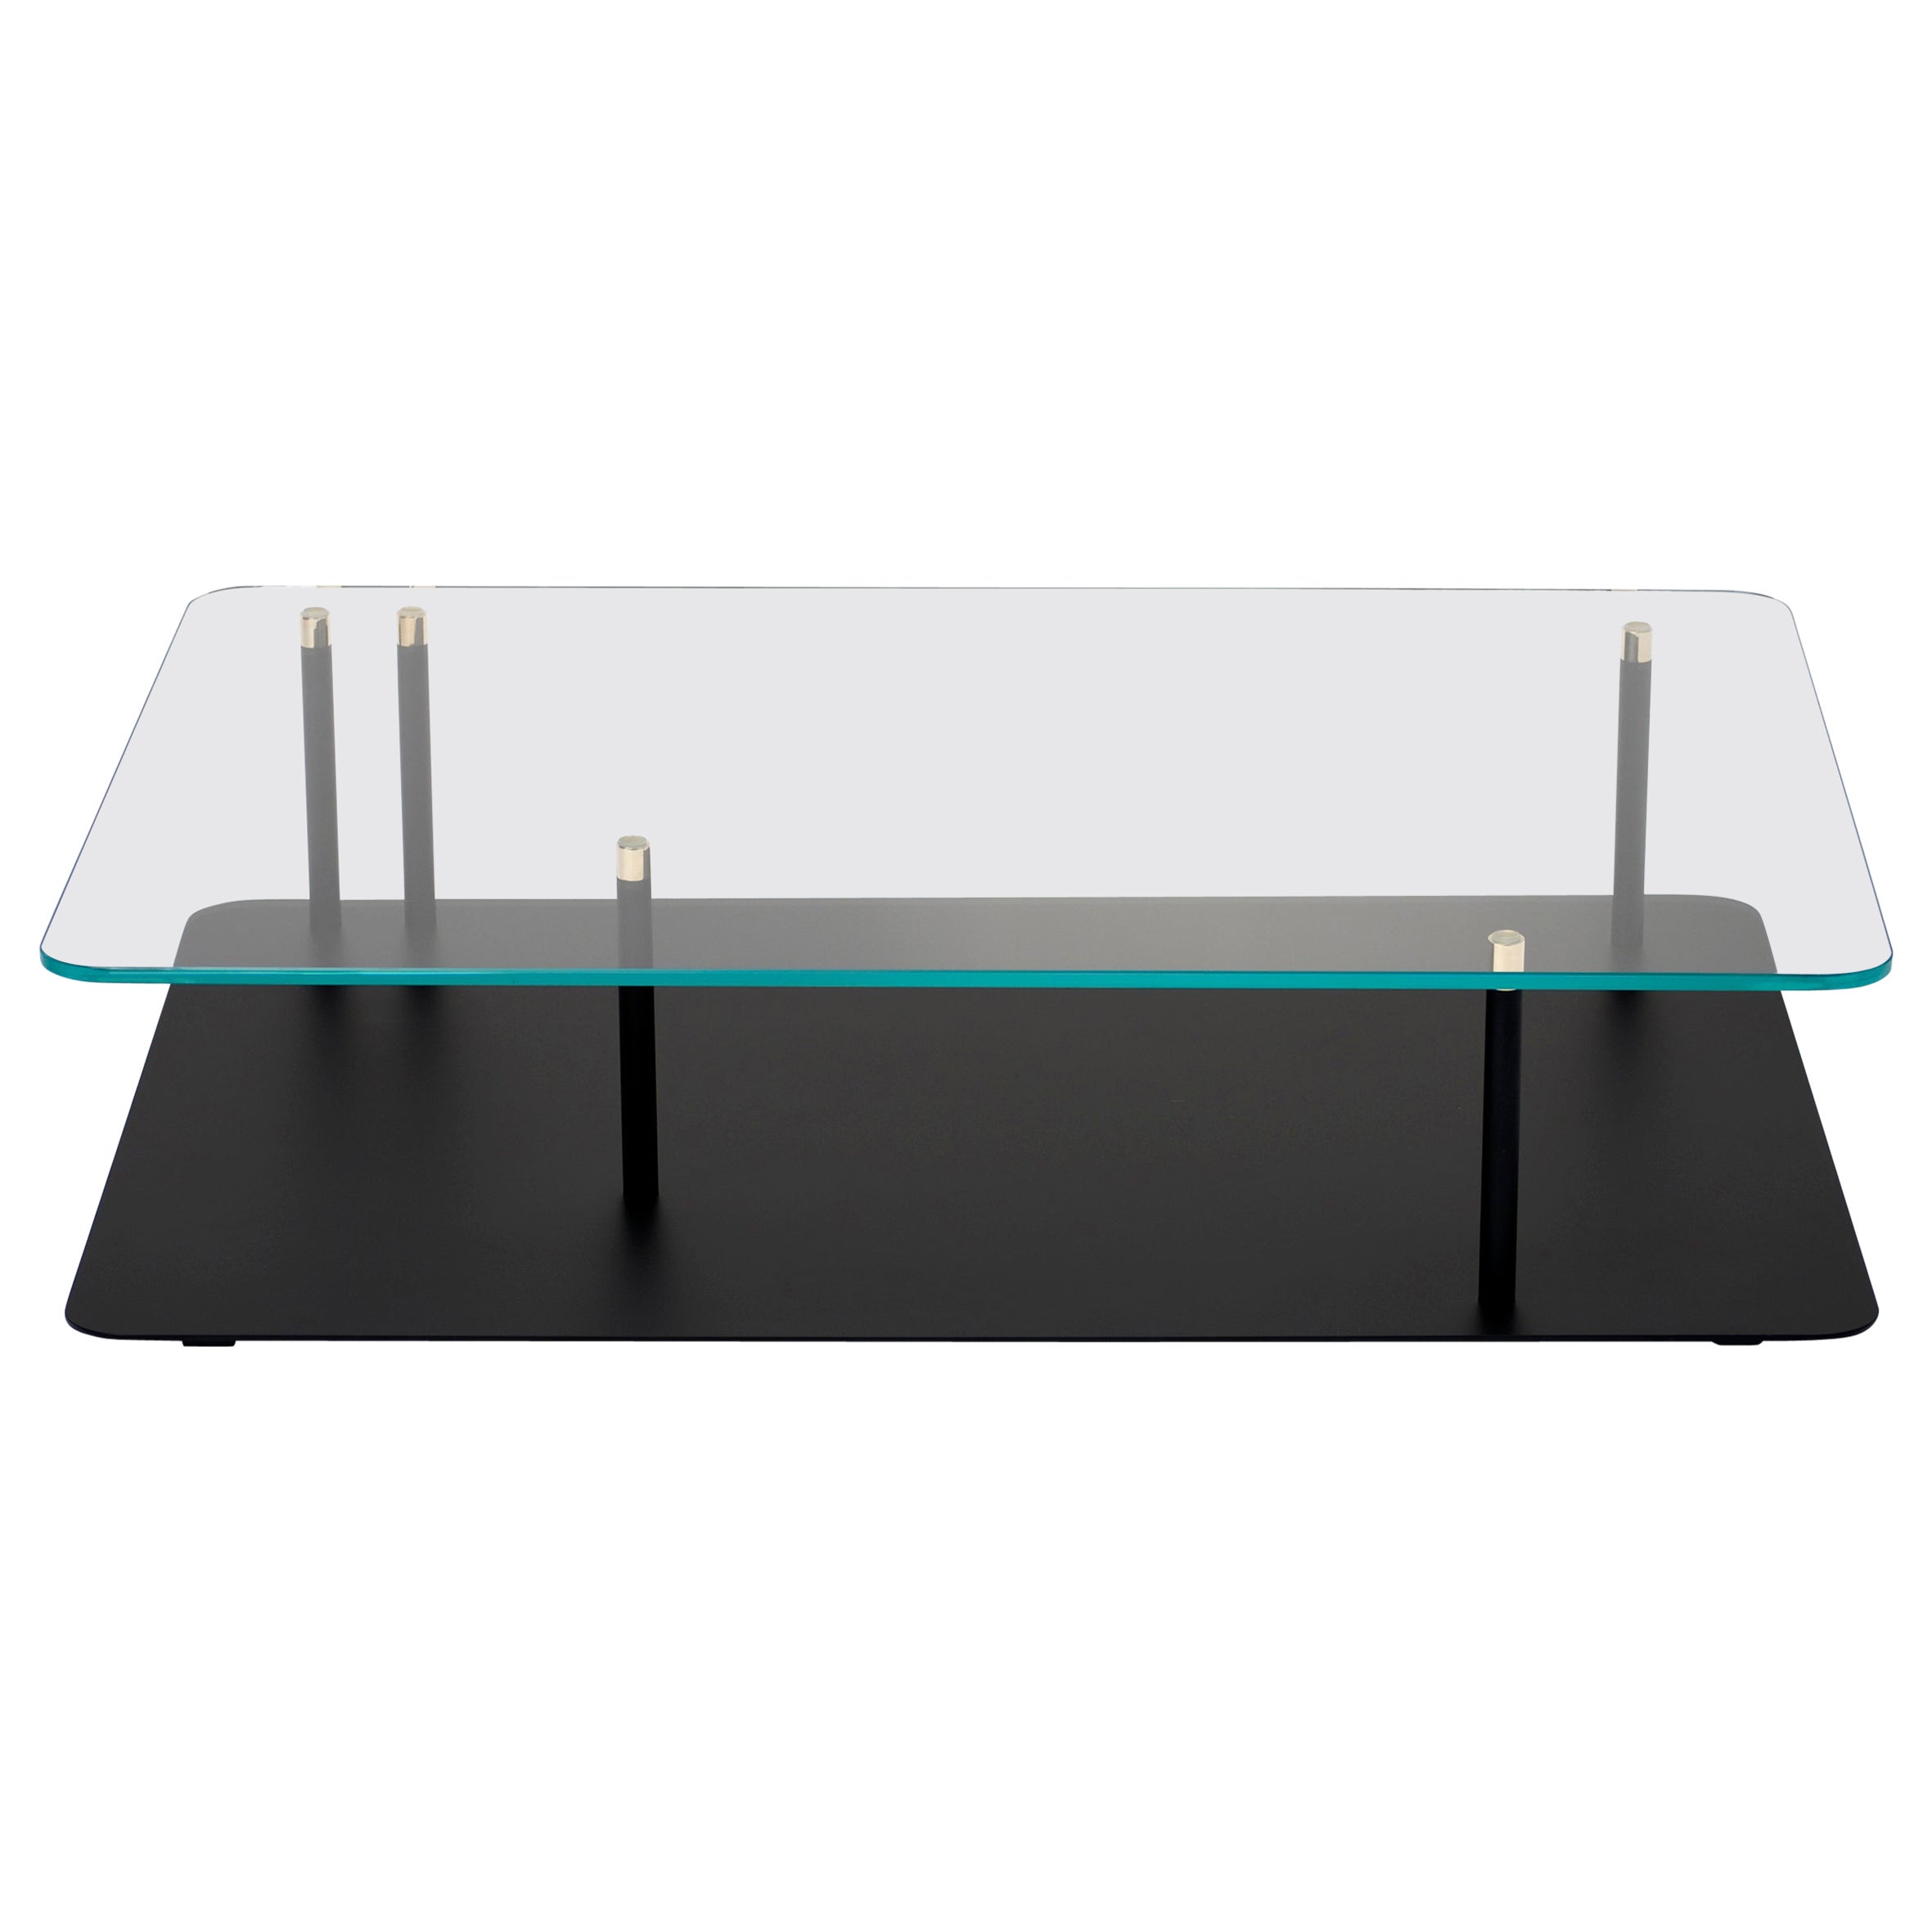 Points of Interest Rectangular Coffee Table by Phase Design